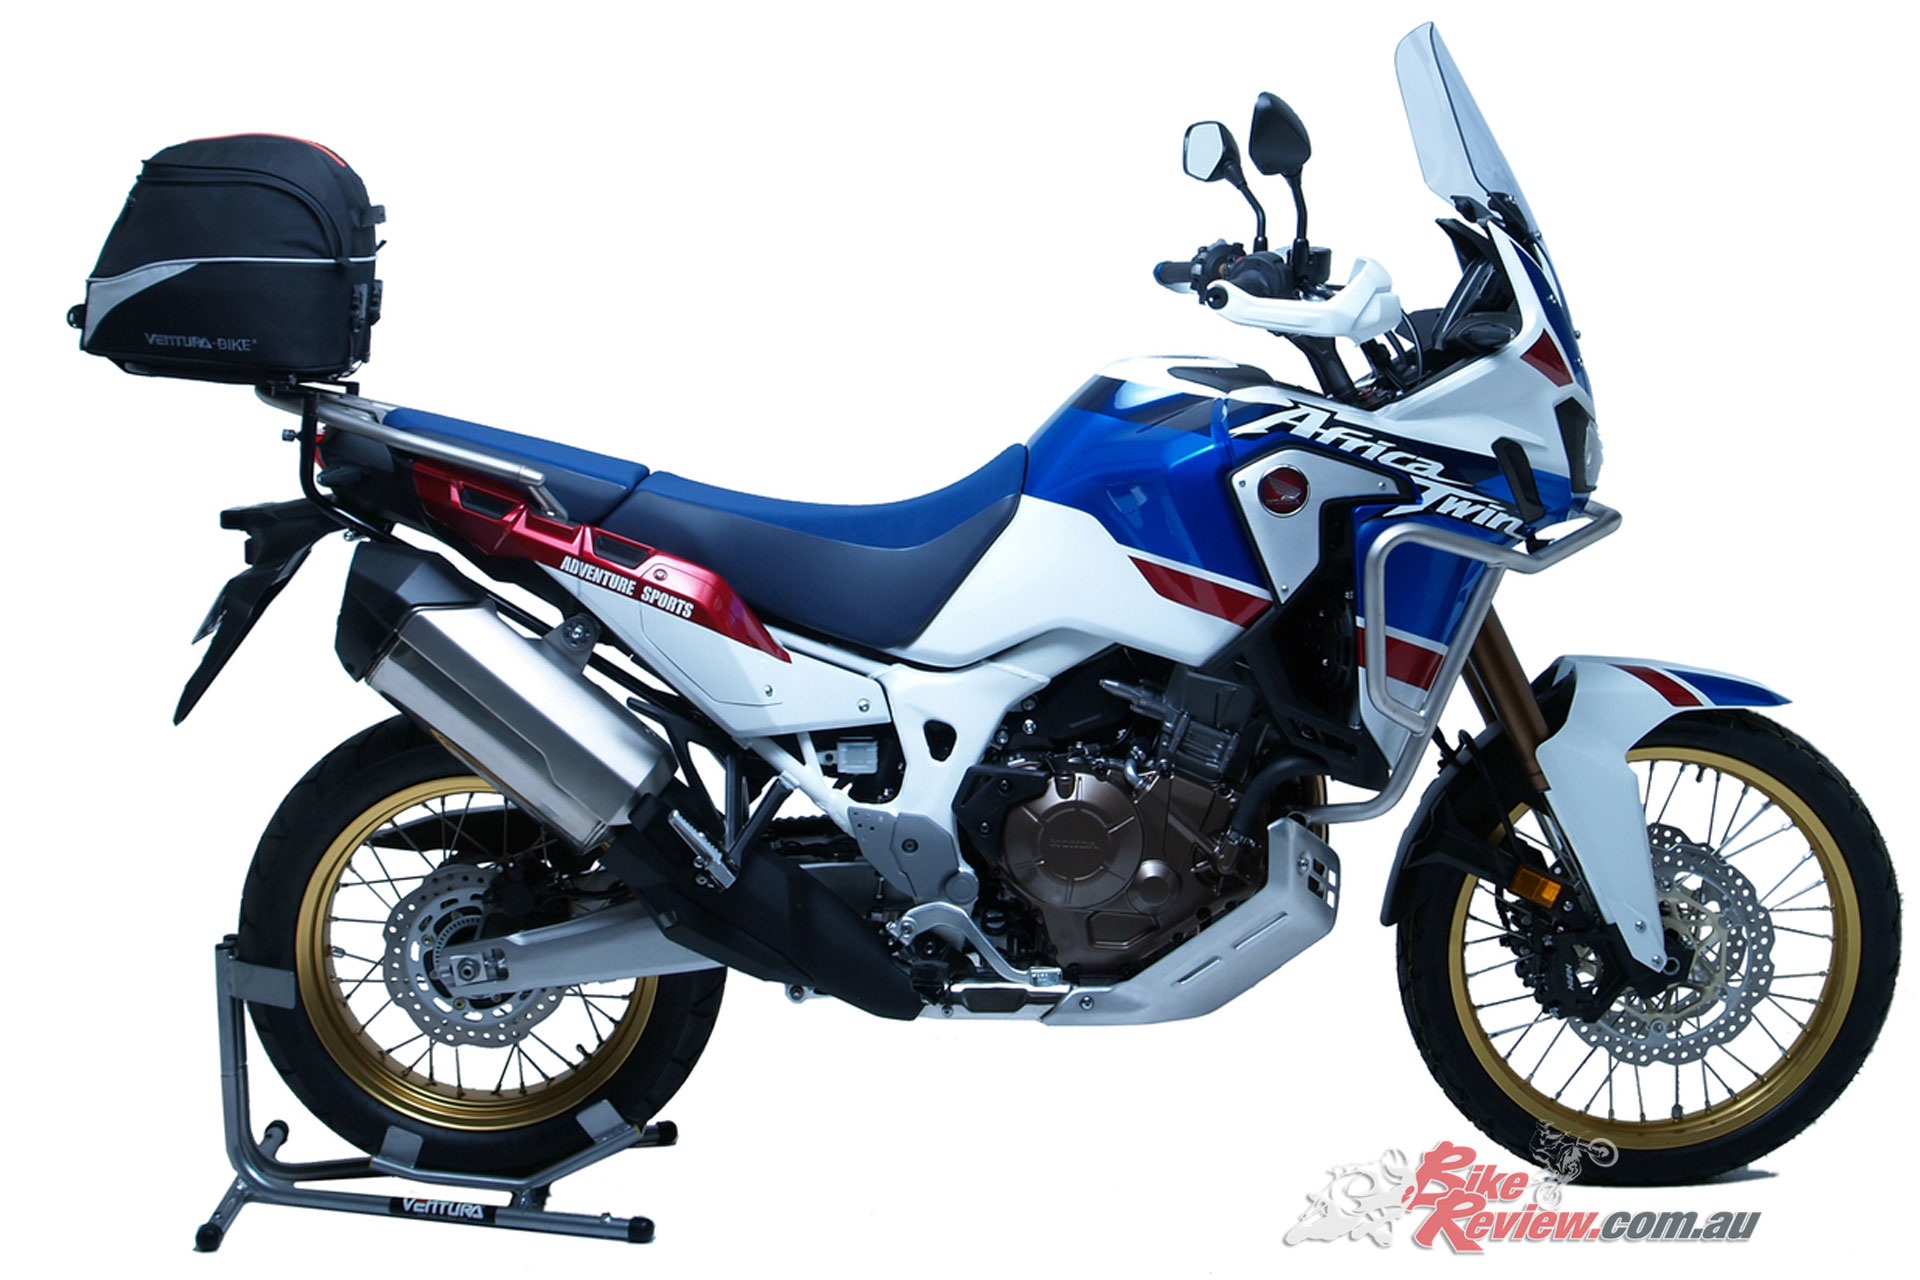 Ventura luggage solutions for the Africa Twin available now!